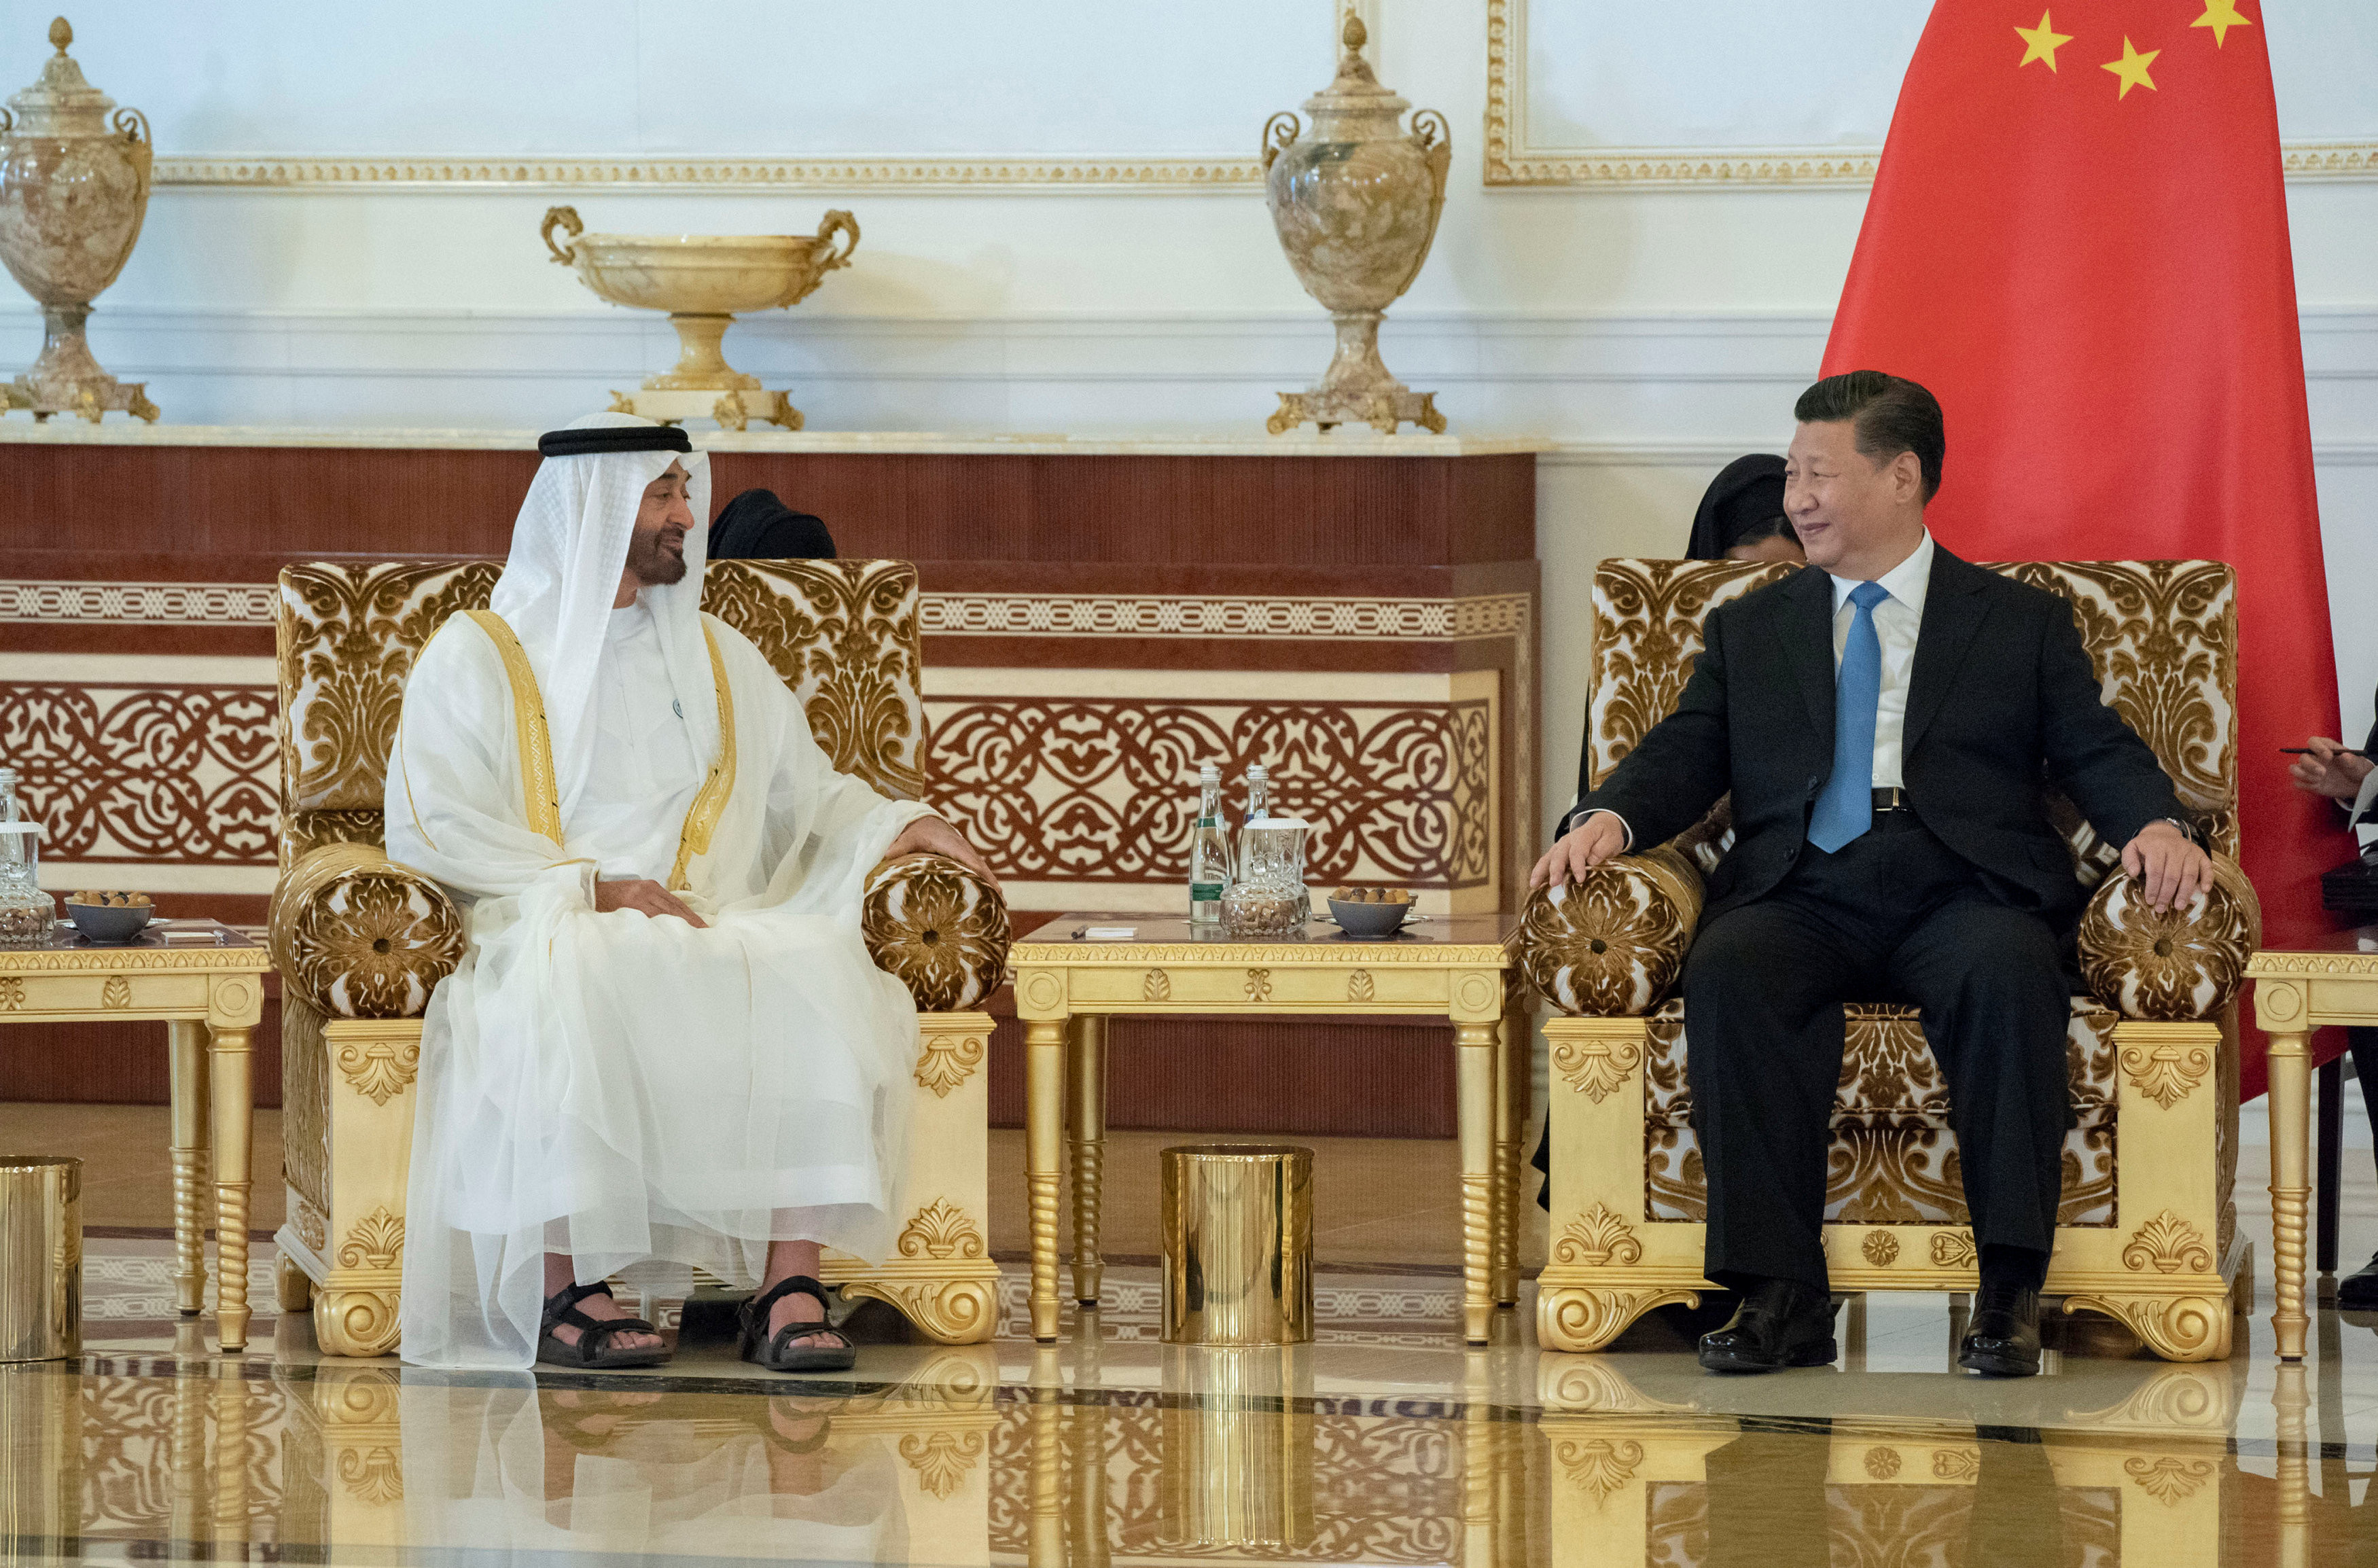   ▲ Xi Jinping arrived in Abu Dhabi for a state visit to the United Arab Emirates. (Photo / Reuters) 